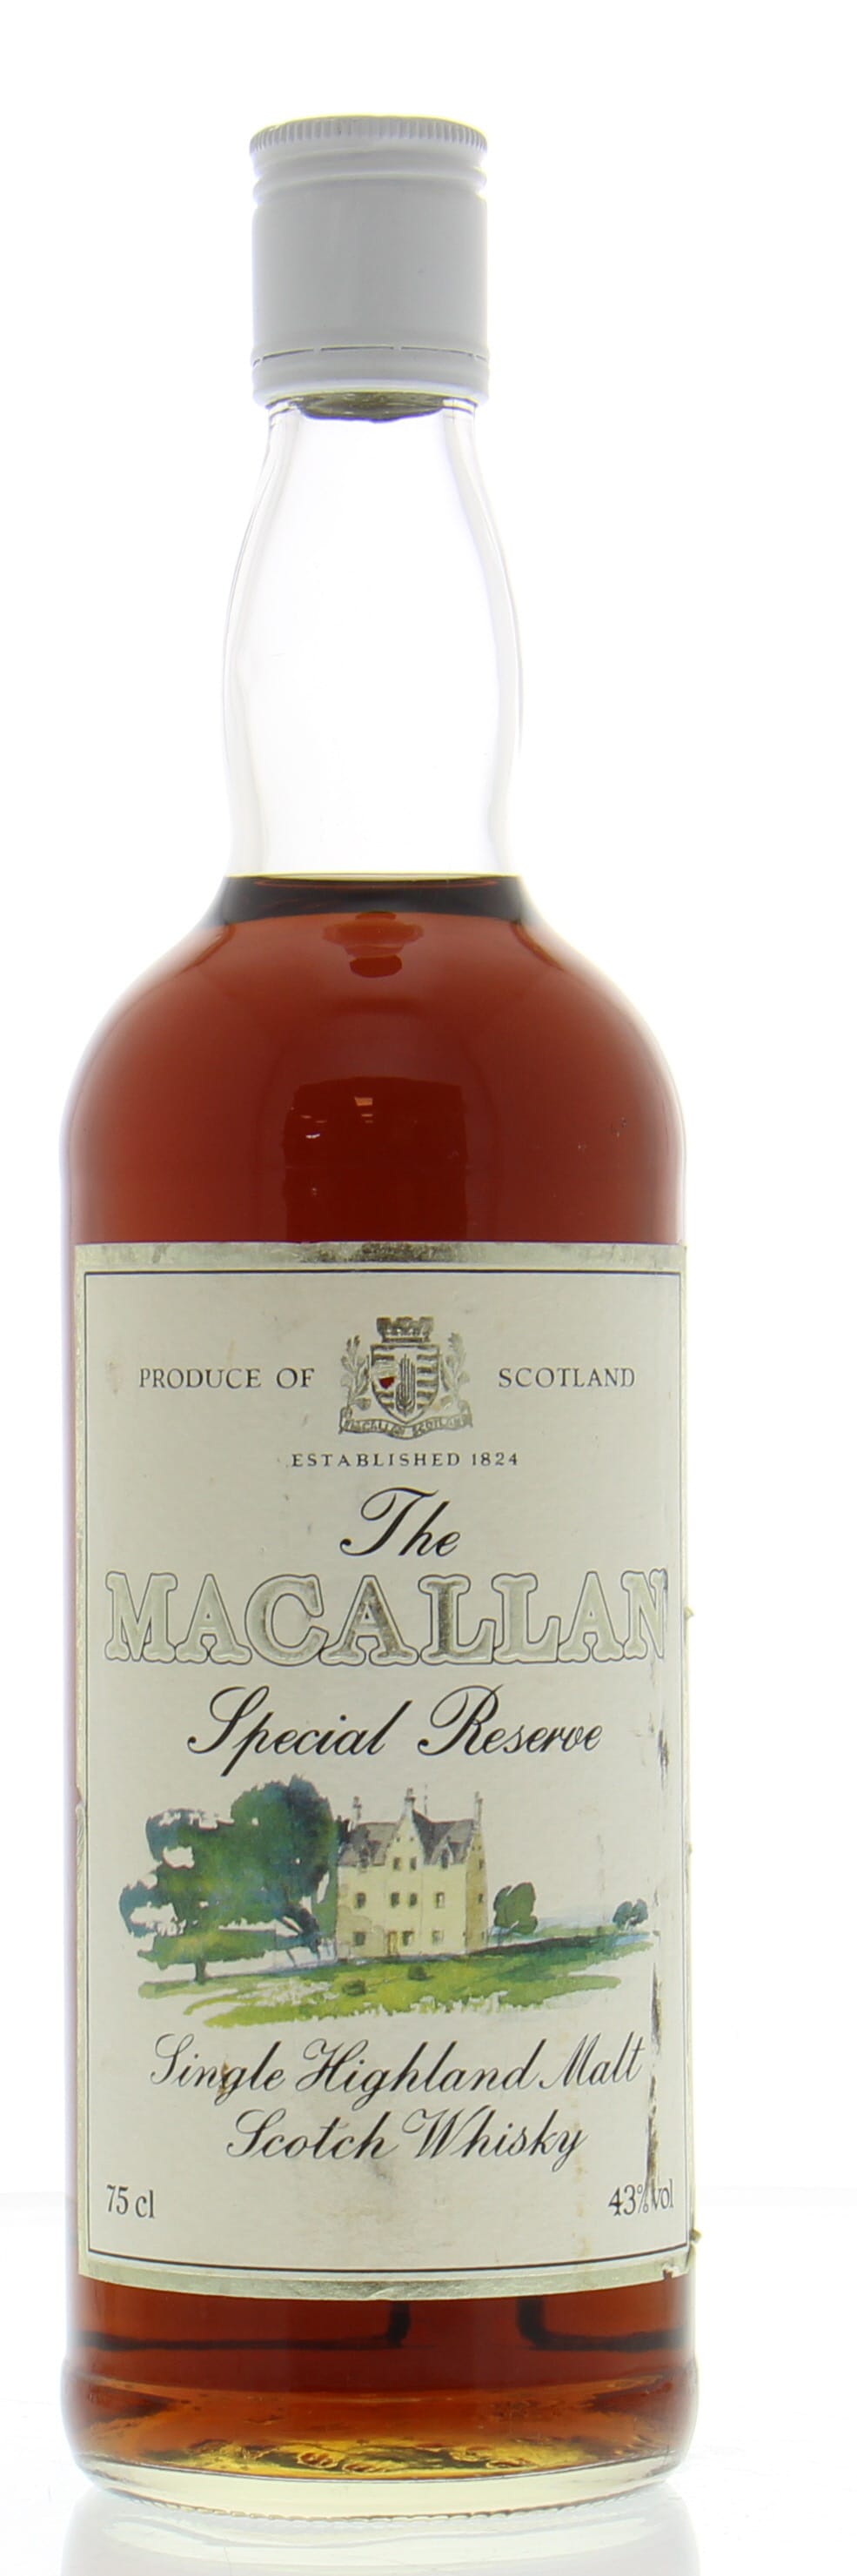 Macallan - Special Reserve 1st Edition 1985